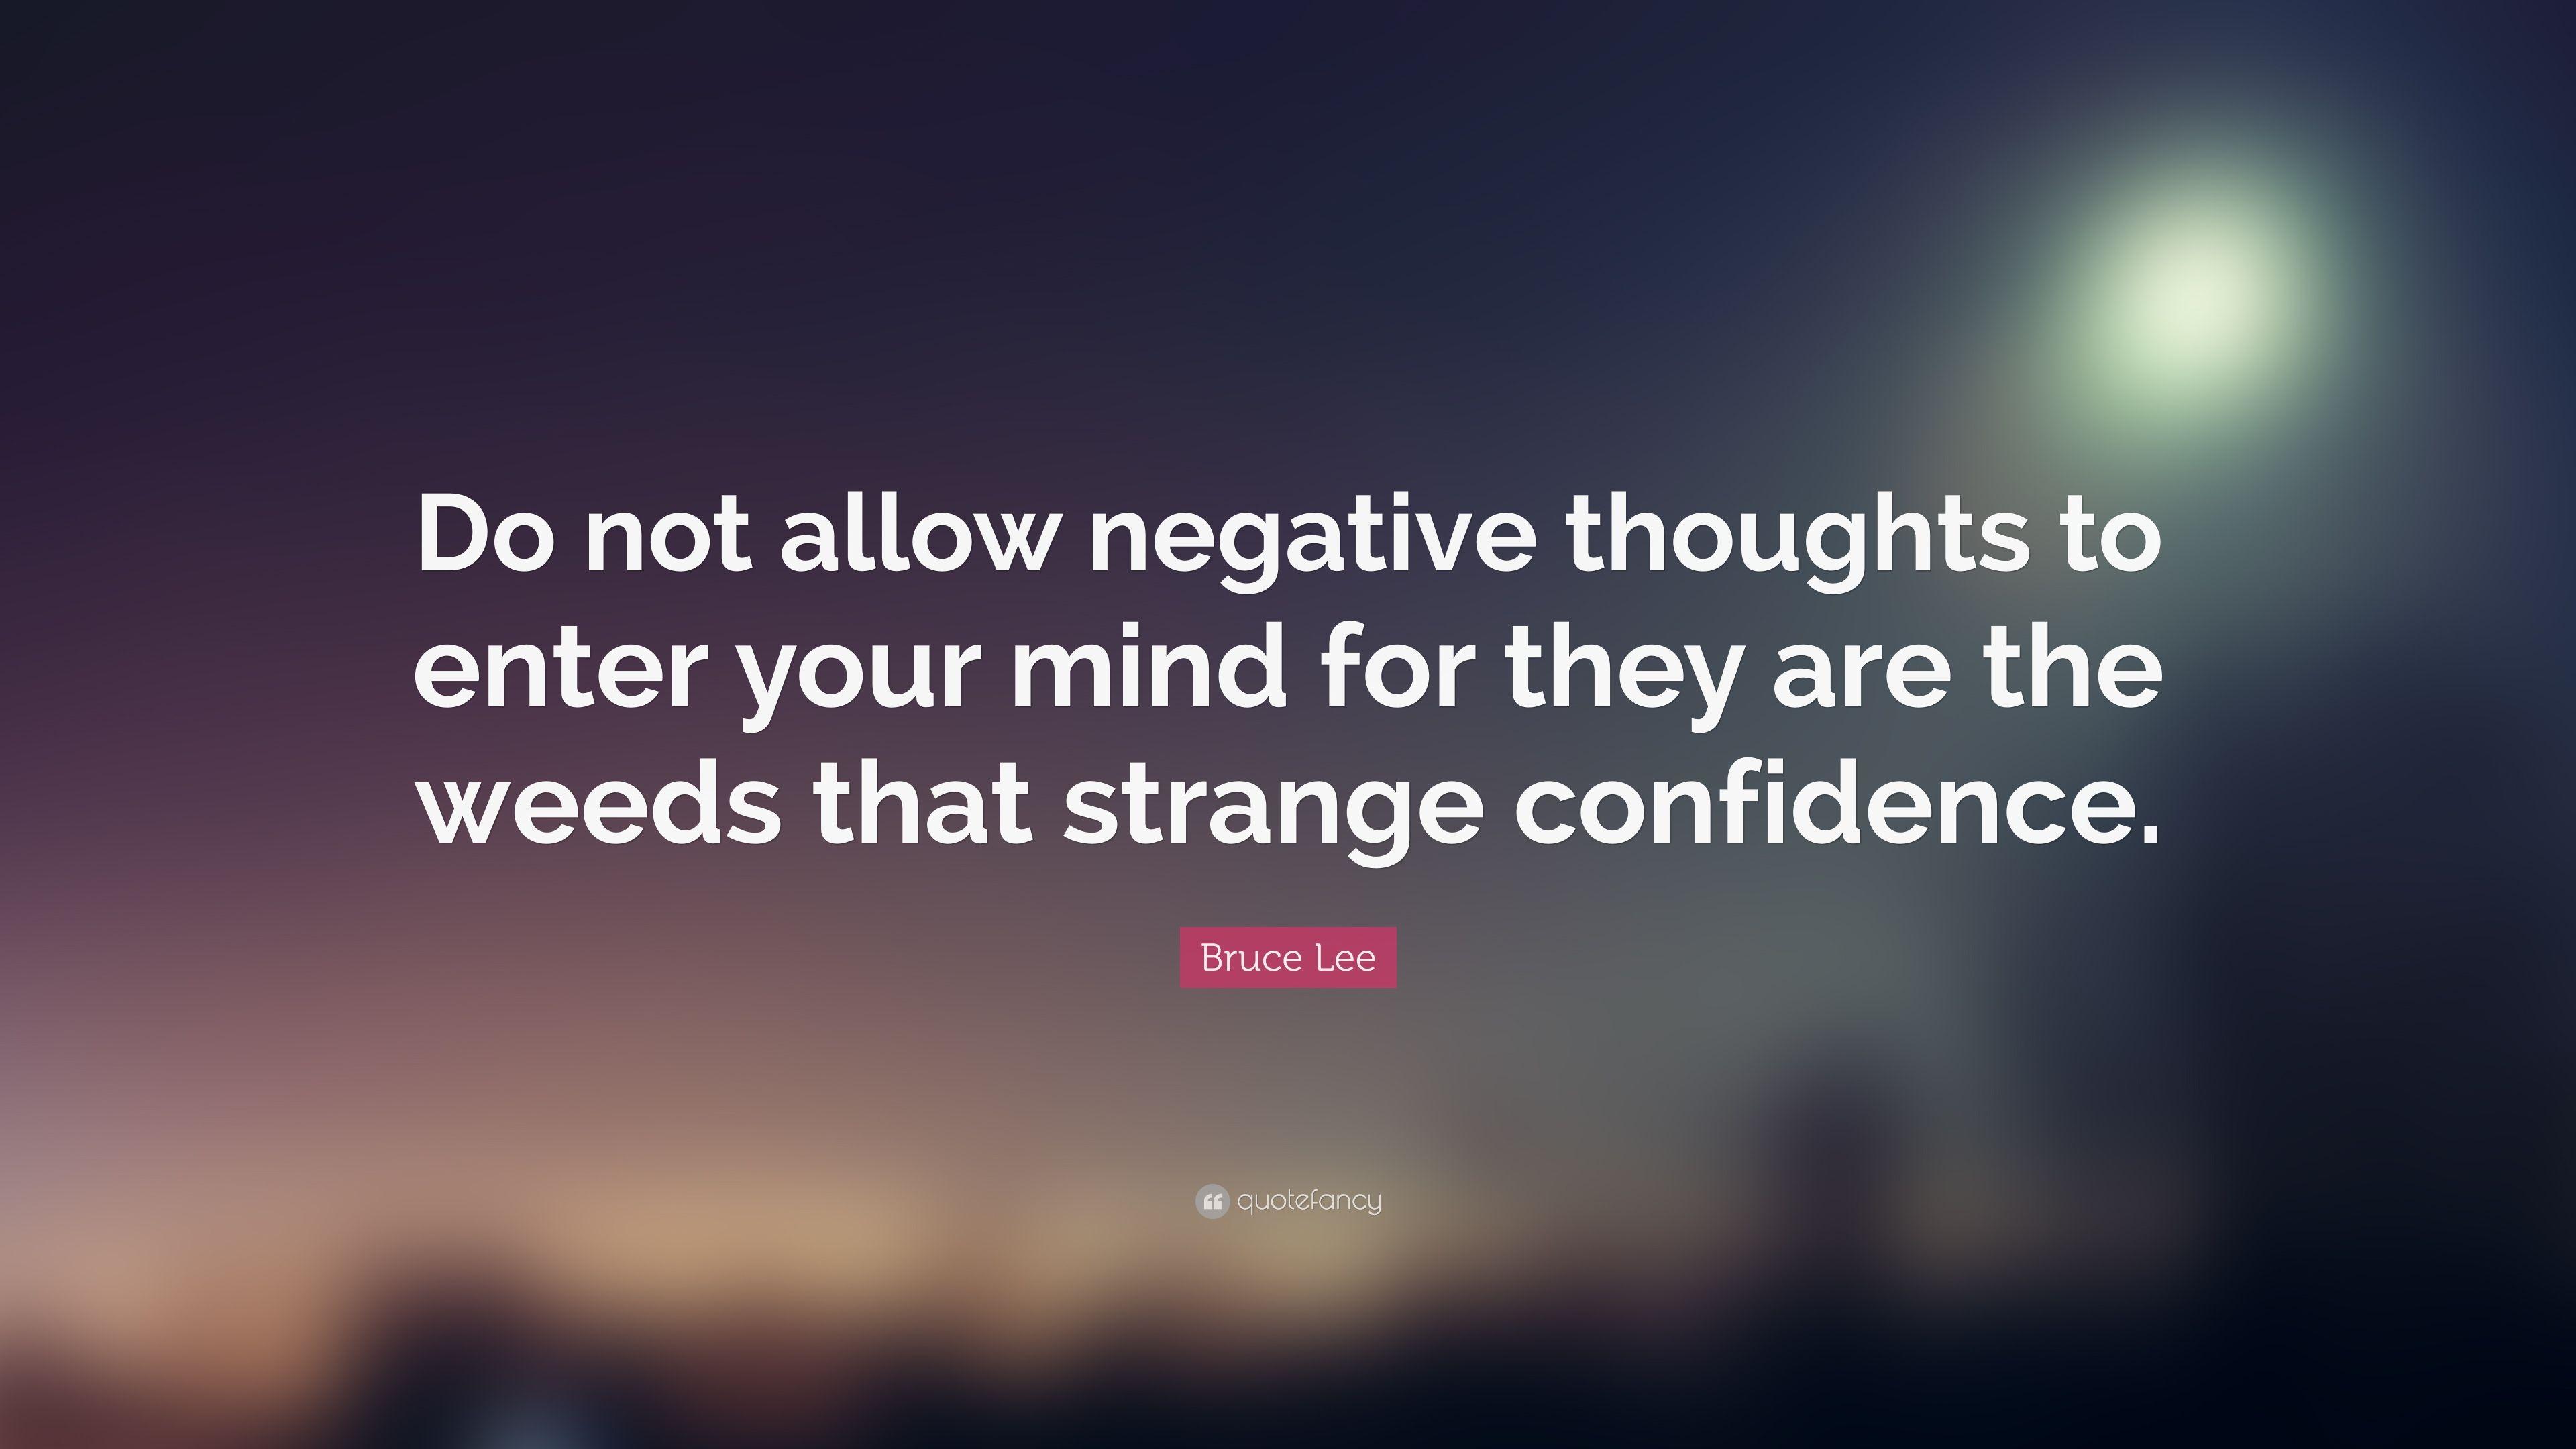 Bruce Lee Quote: “Do not allow negative thoughts to enter your mind for they are the weeds that strange confidence.” (12 wallpaper)